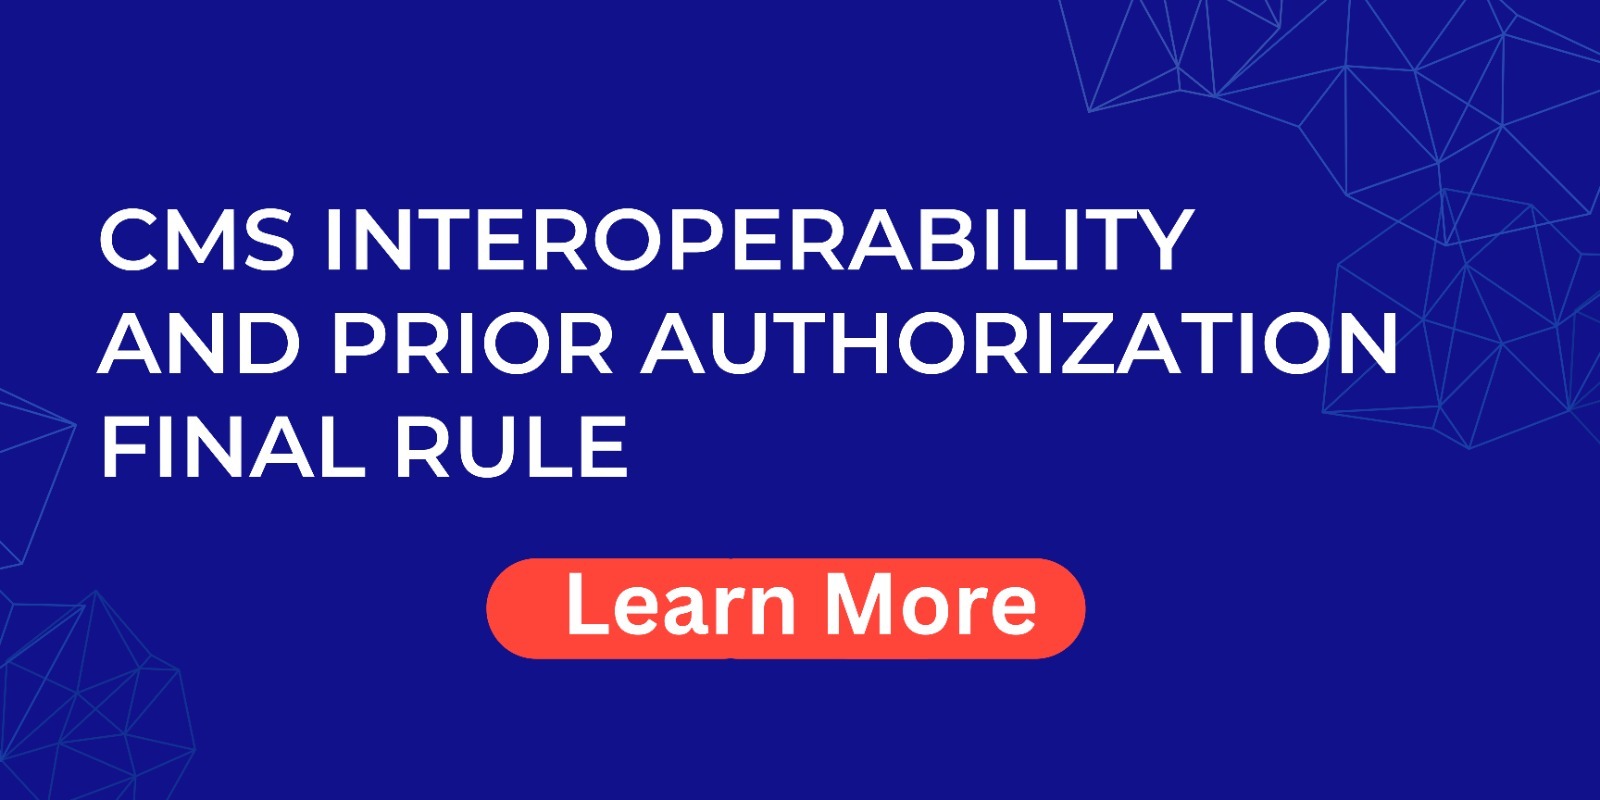 CMS Interoperability and Prior Authorization Final Rule: Your Quick Overview